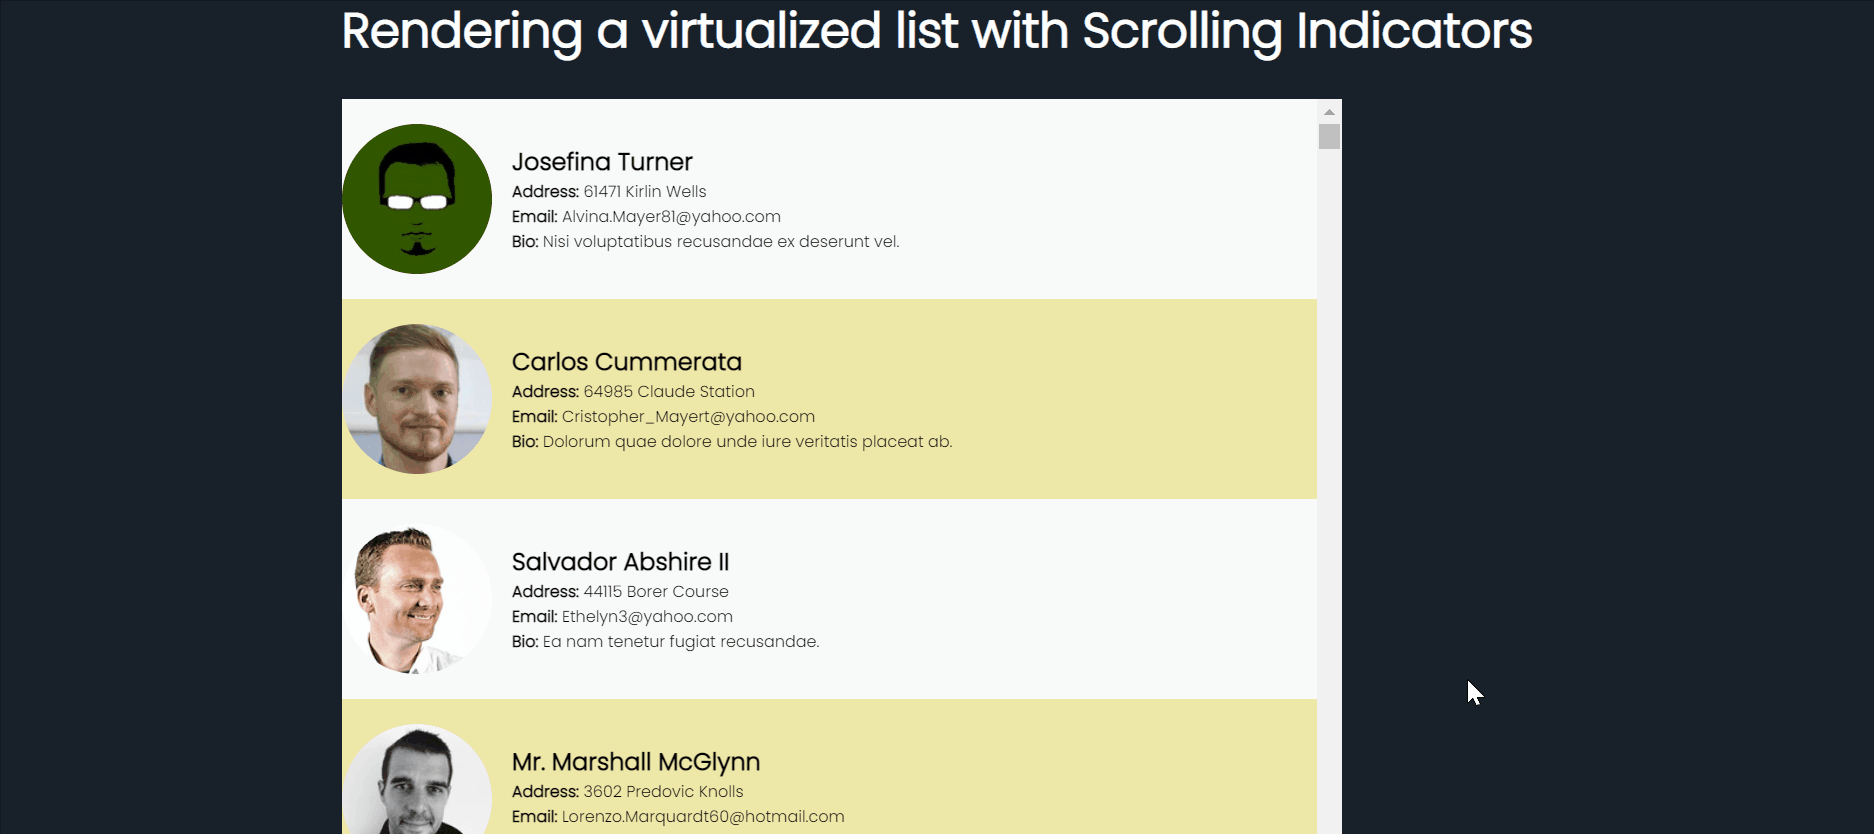 Rendering virtualized list with scroll indicators